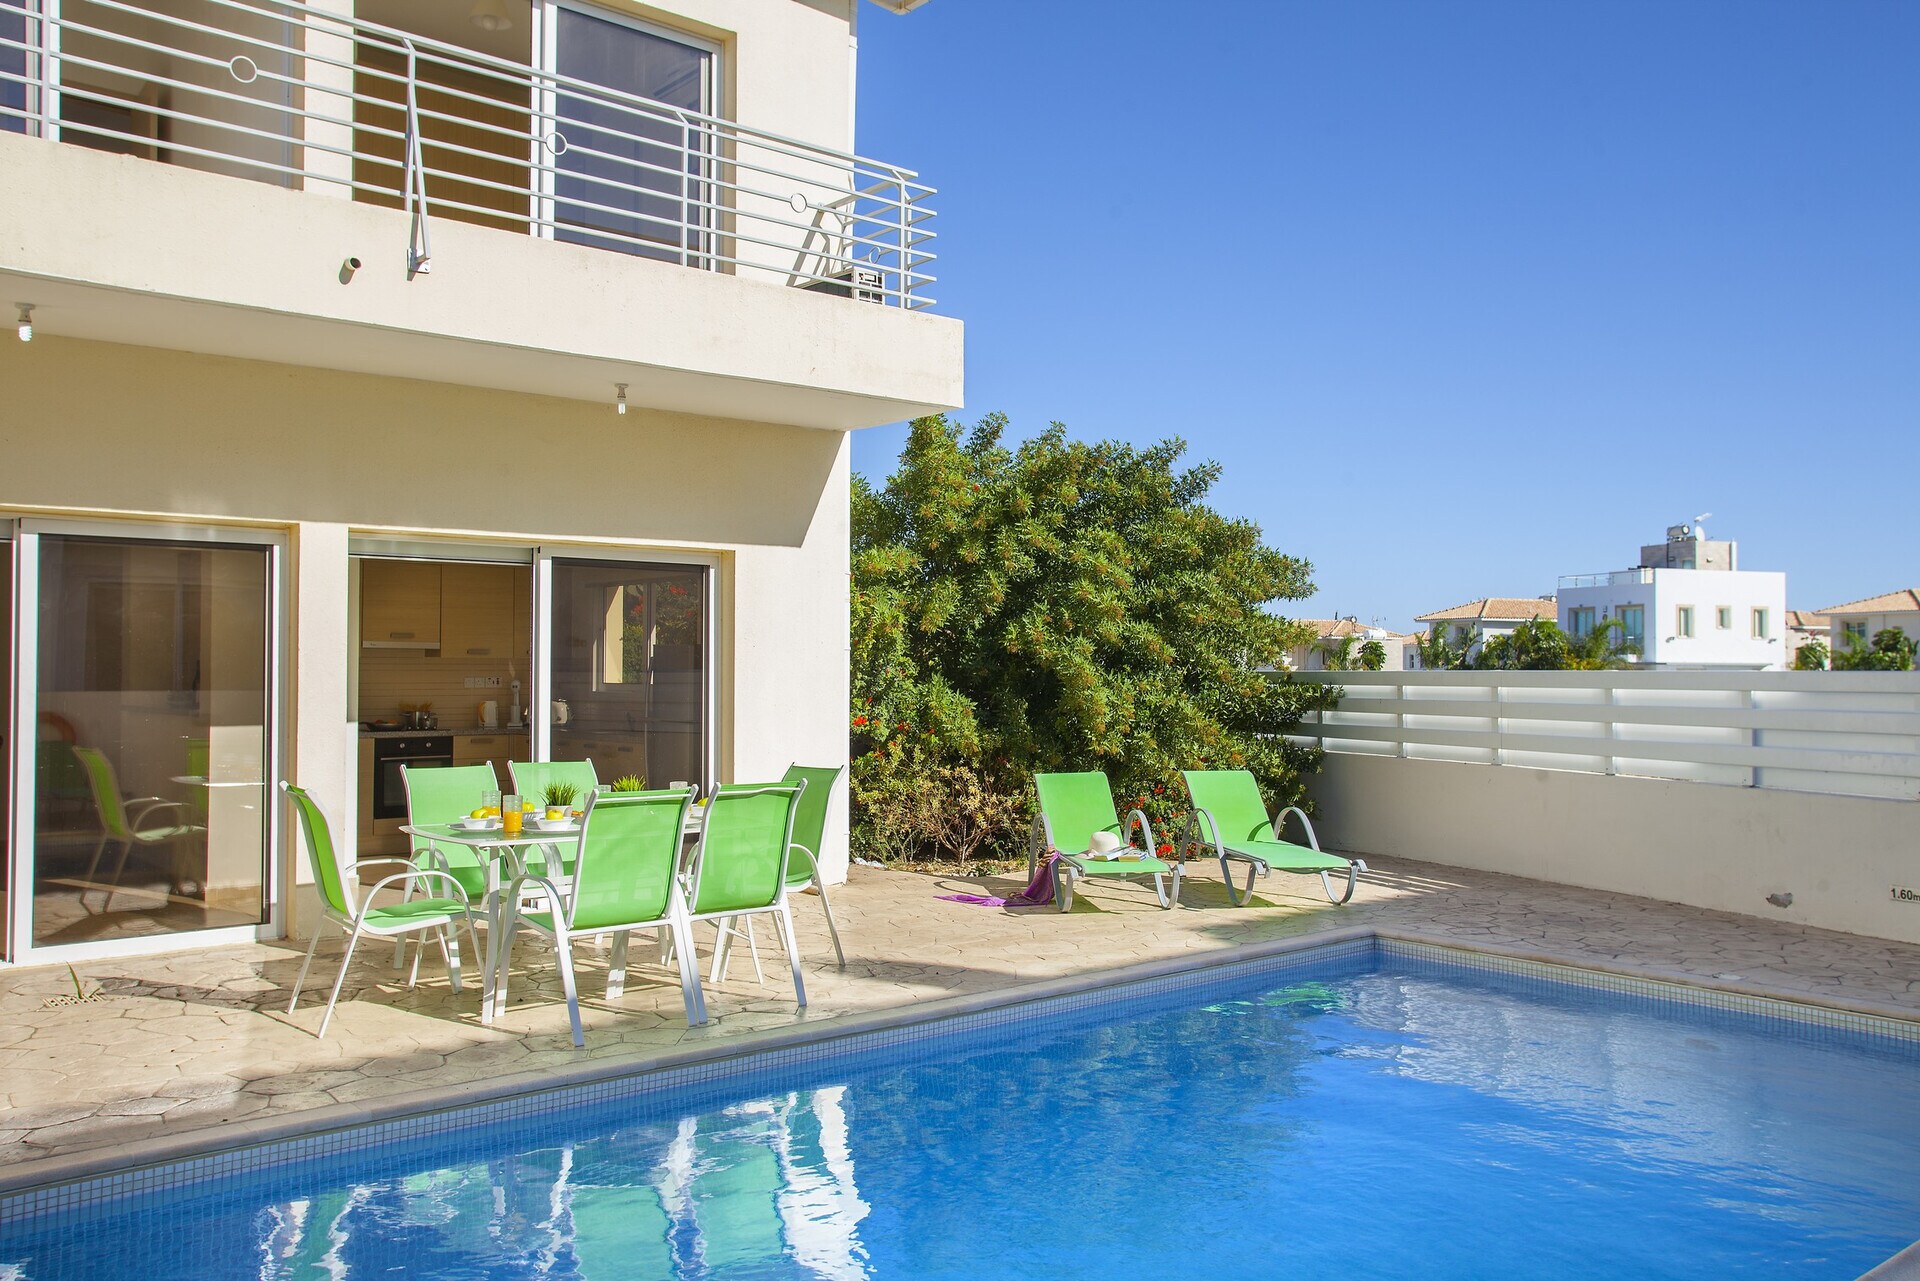 Property Image 2 - Imagine You and Your Family Renting this Luxury Villa in Protaras, minutes from the Beach, Protaras Villa 